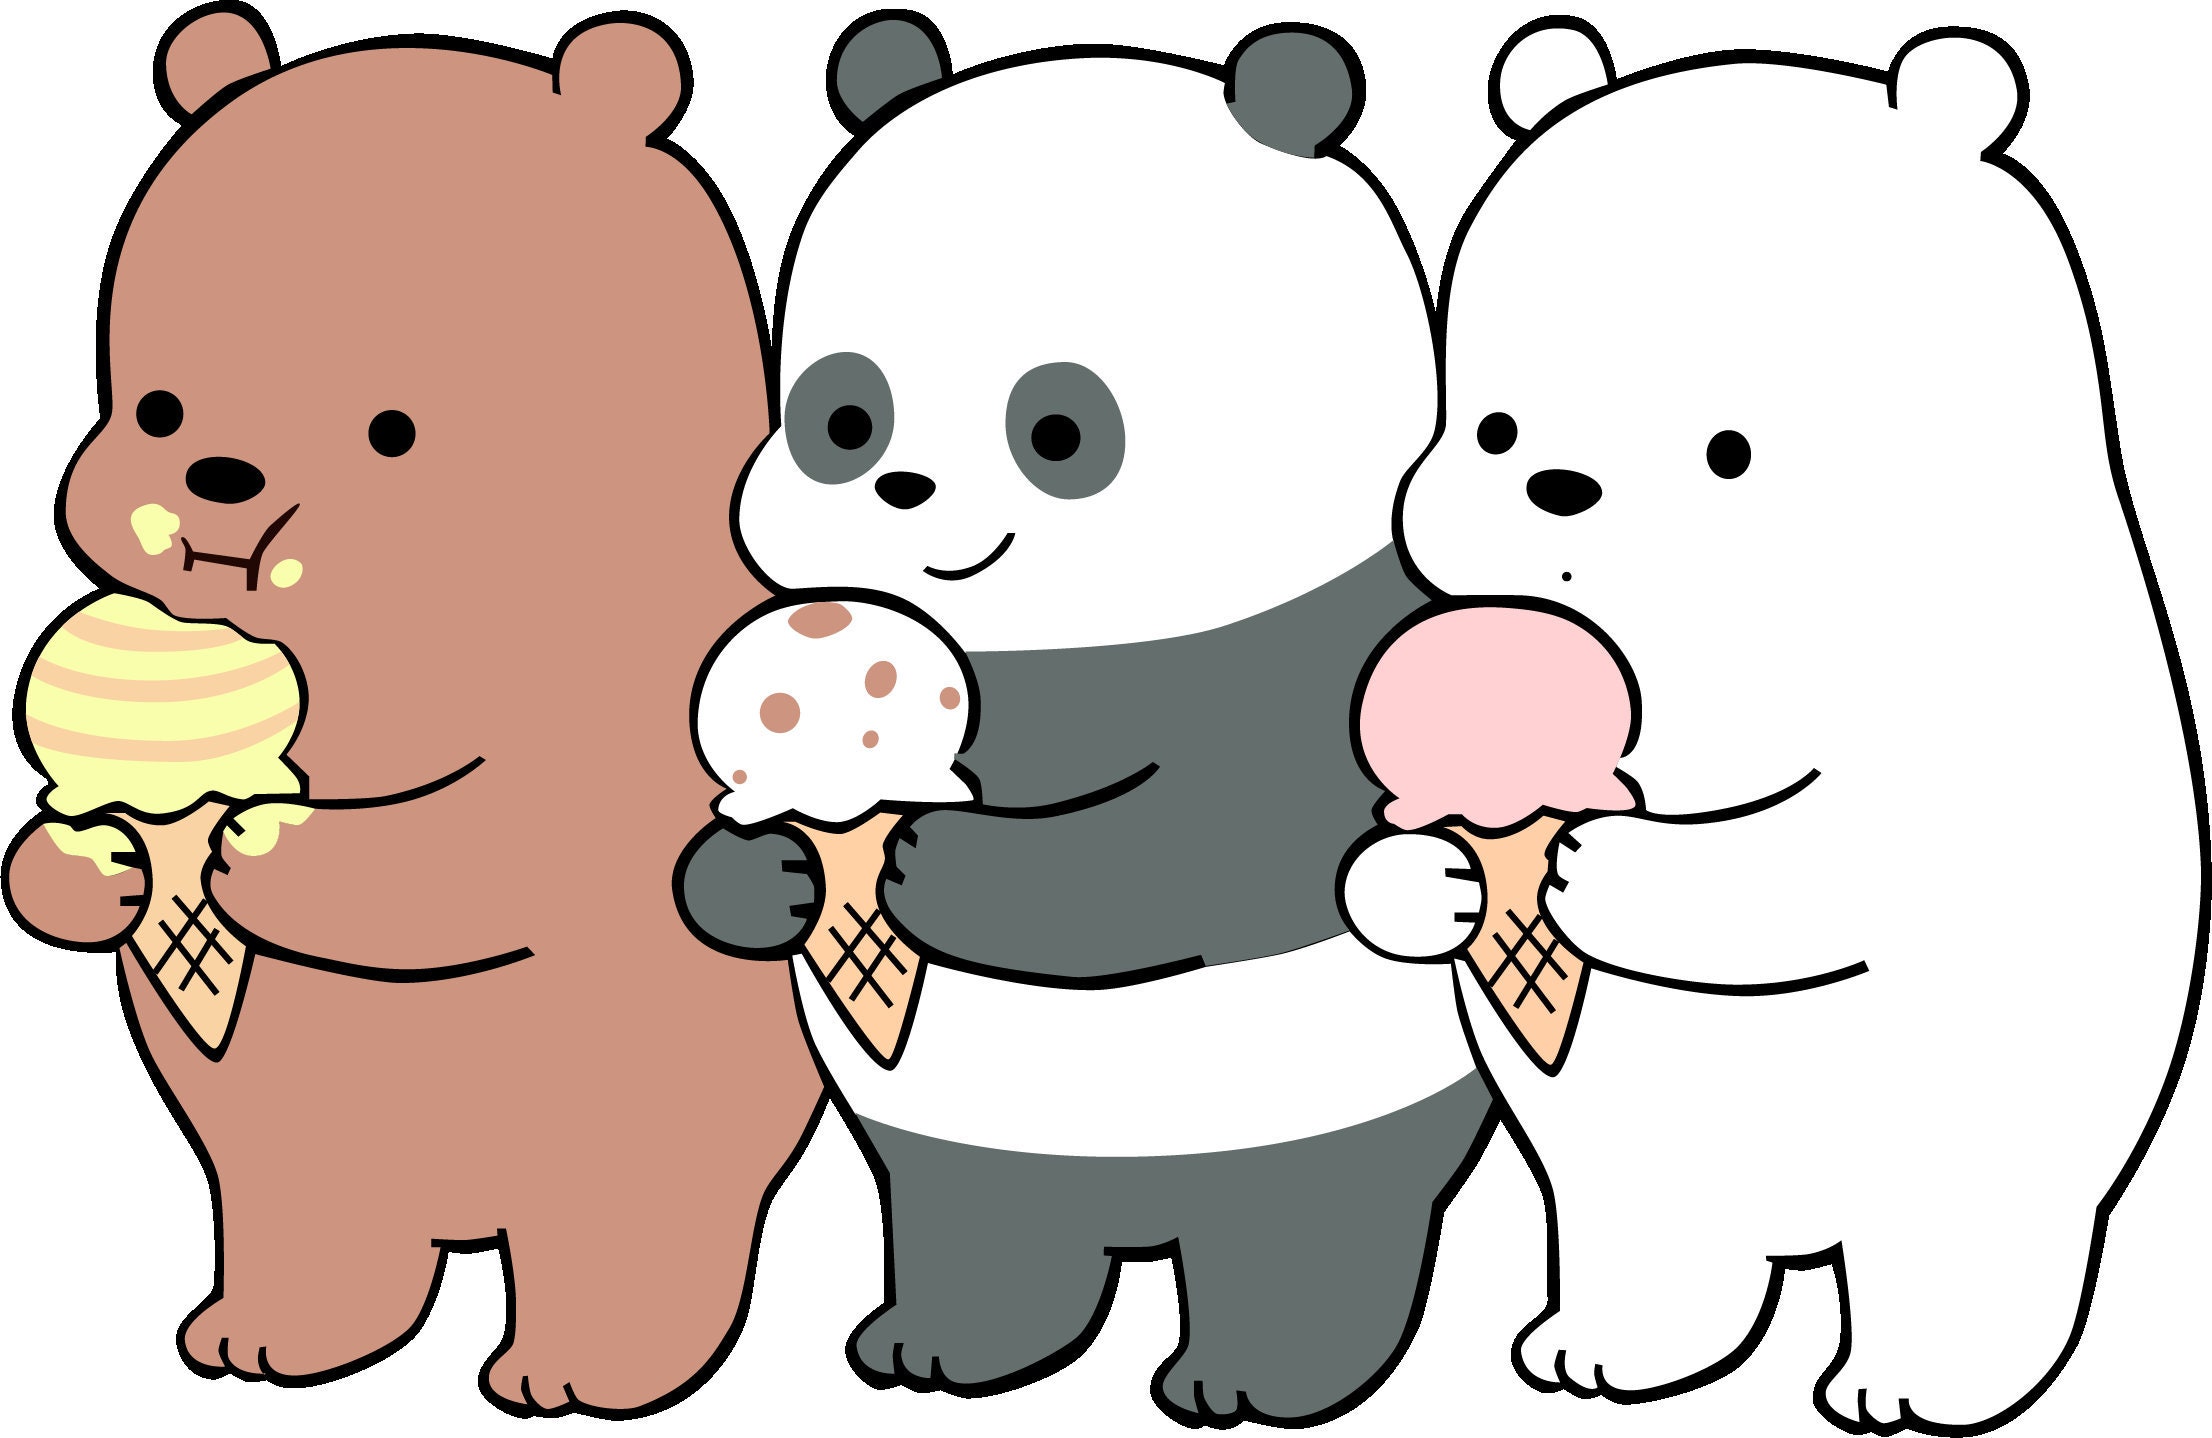 We Bare Bears Svg Cartoon Clip Art Polar Bear Svg Grizzly Etsy Images And Photos Finder